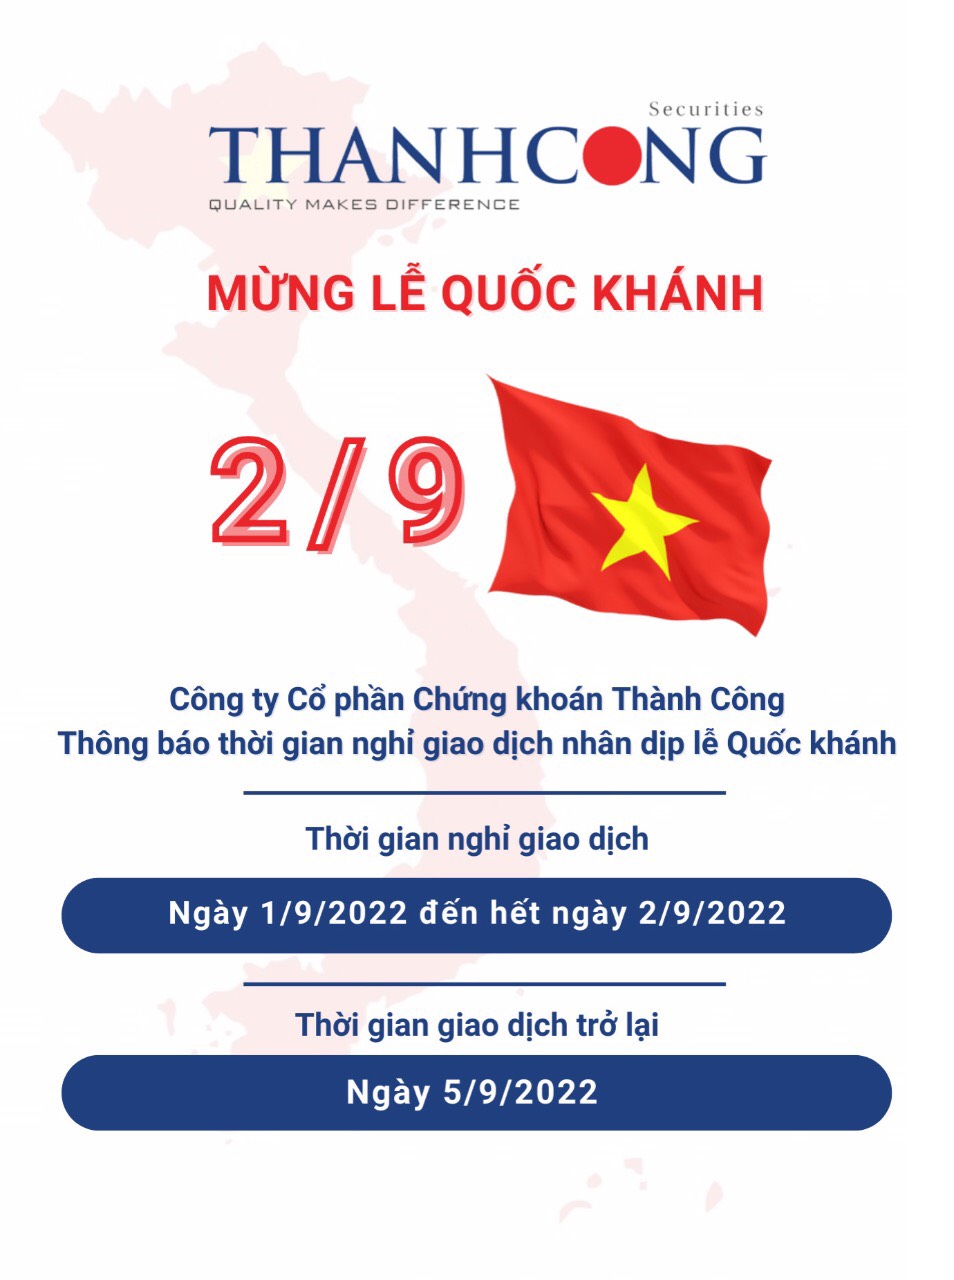 ANNOUCEMENT ON VIETNAM NATIONAL DAY